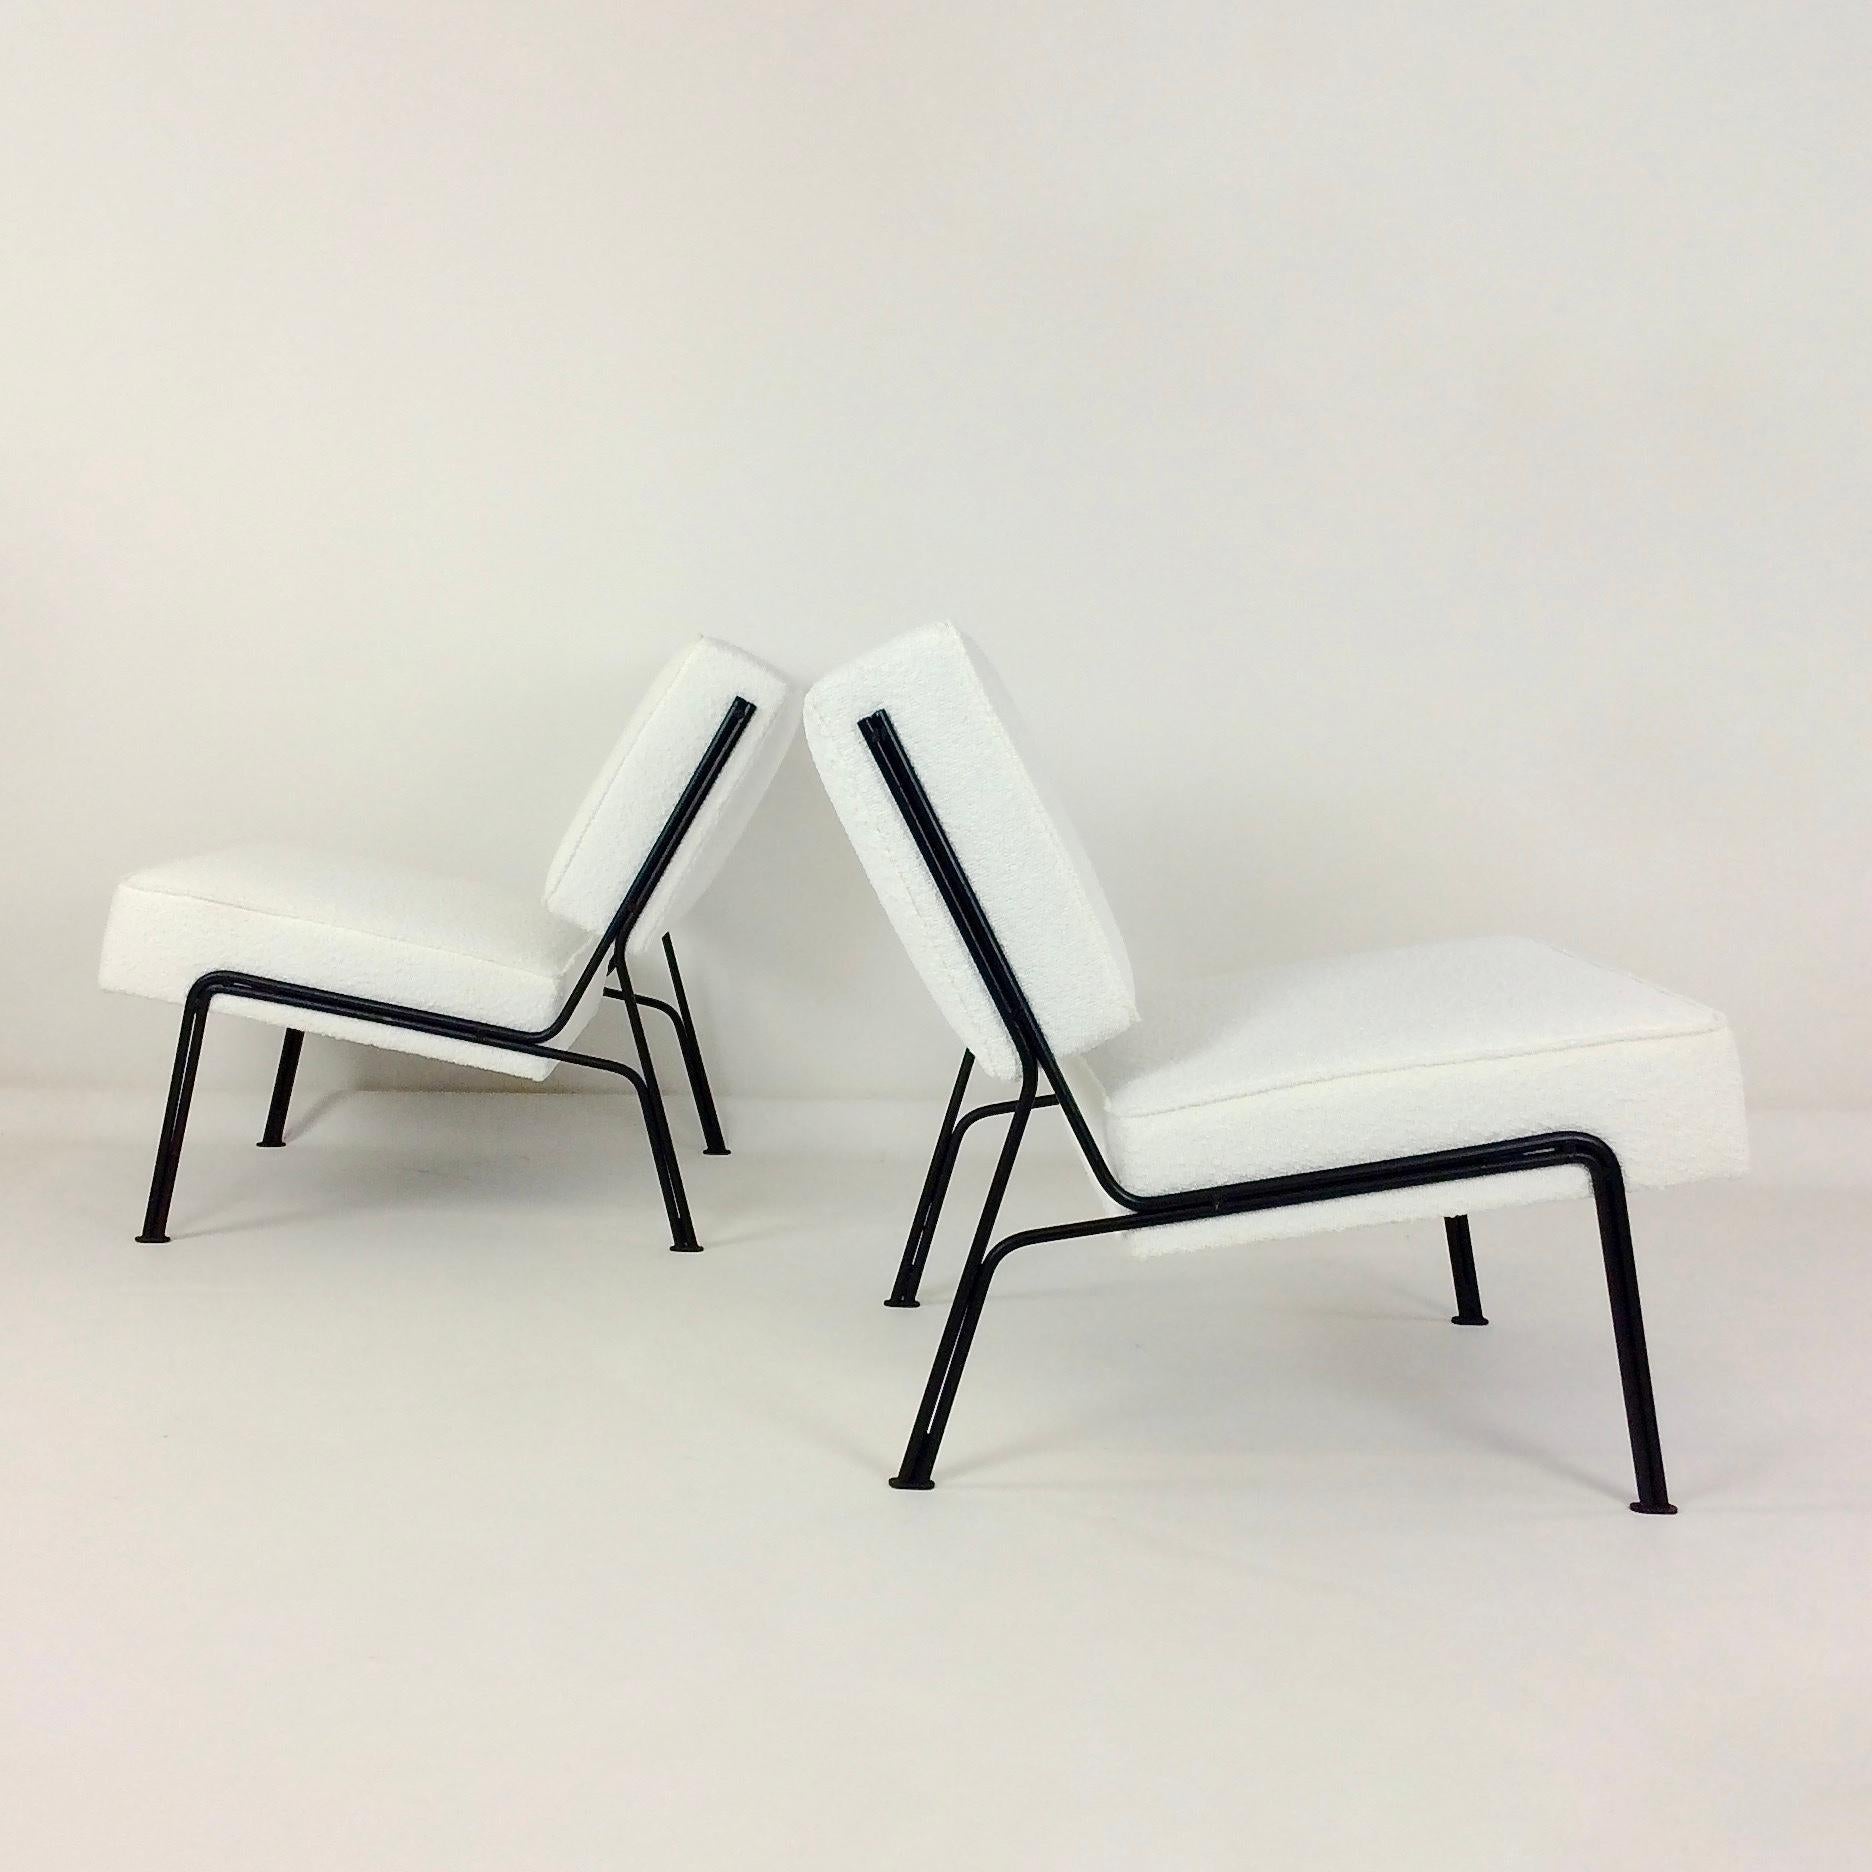 Pair of G2 Chairs By A.R.P. Guariche, Motte, Mortier for Airborne, 1953, France. 1